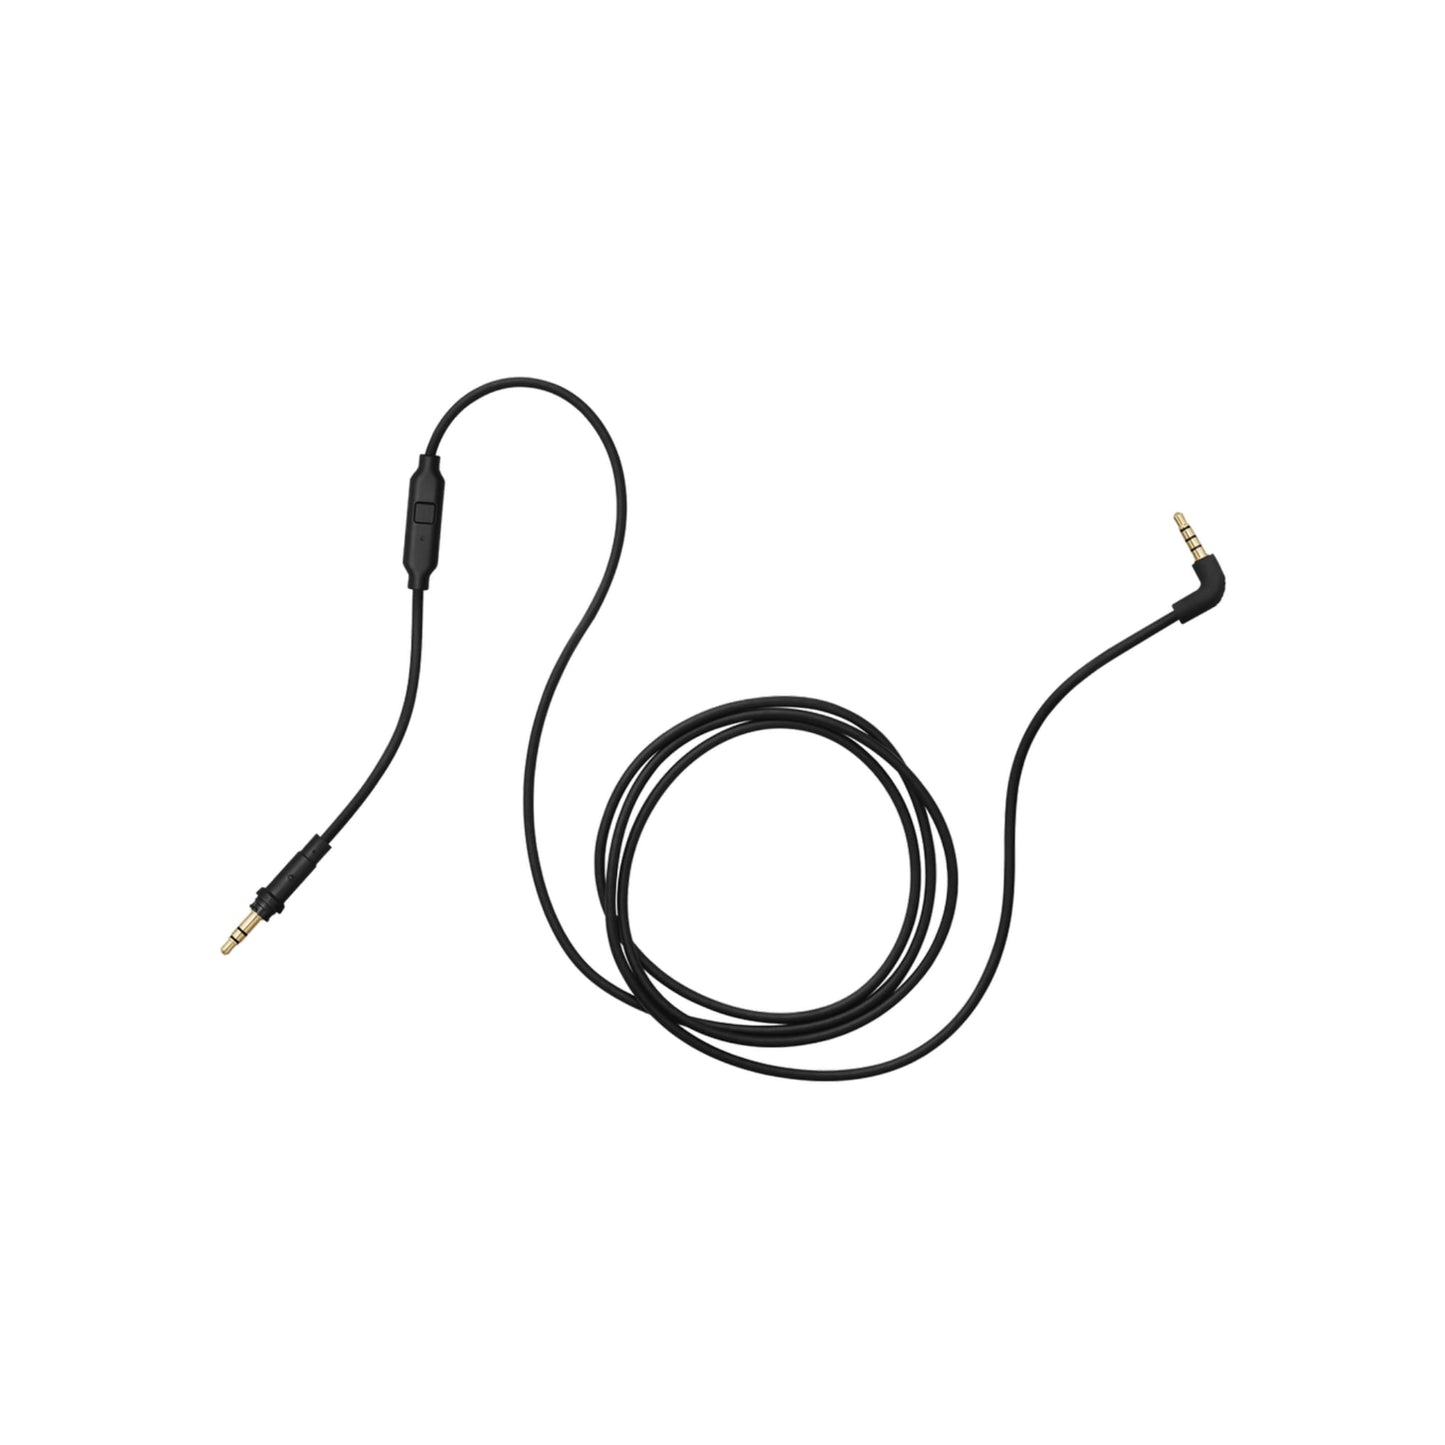 C01 - 1.2m Straight Cable with Mic